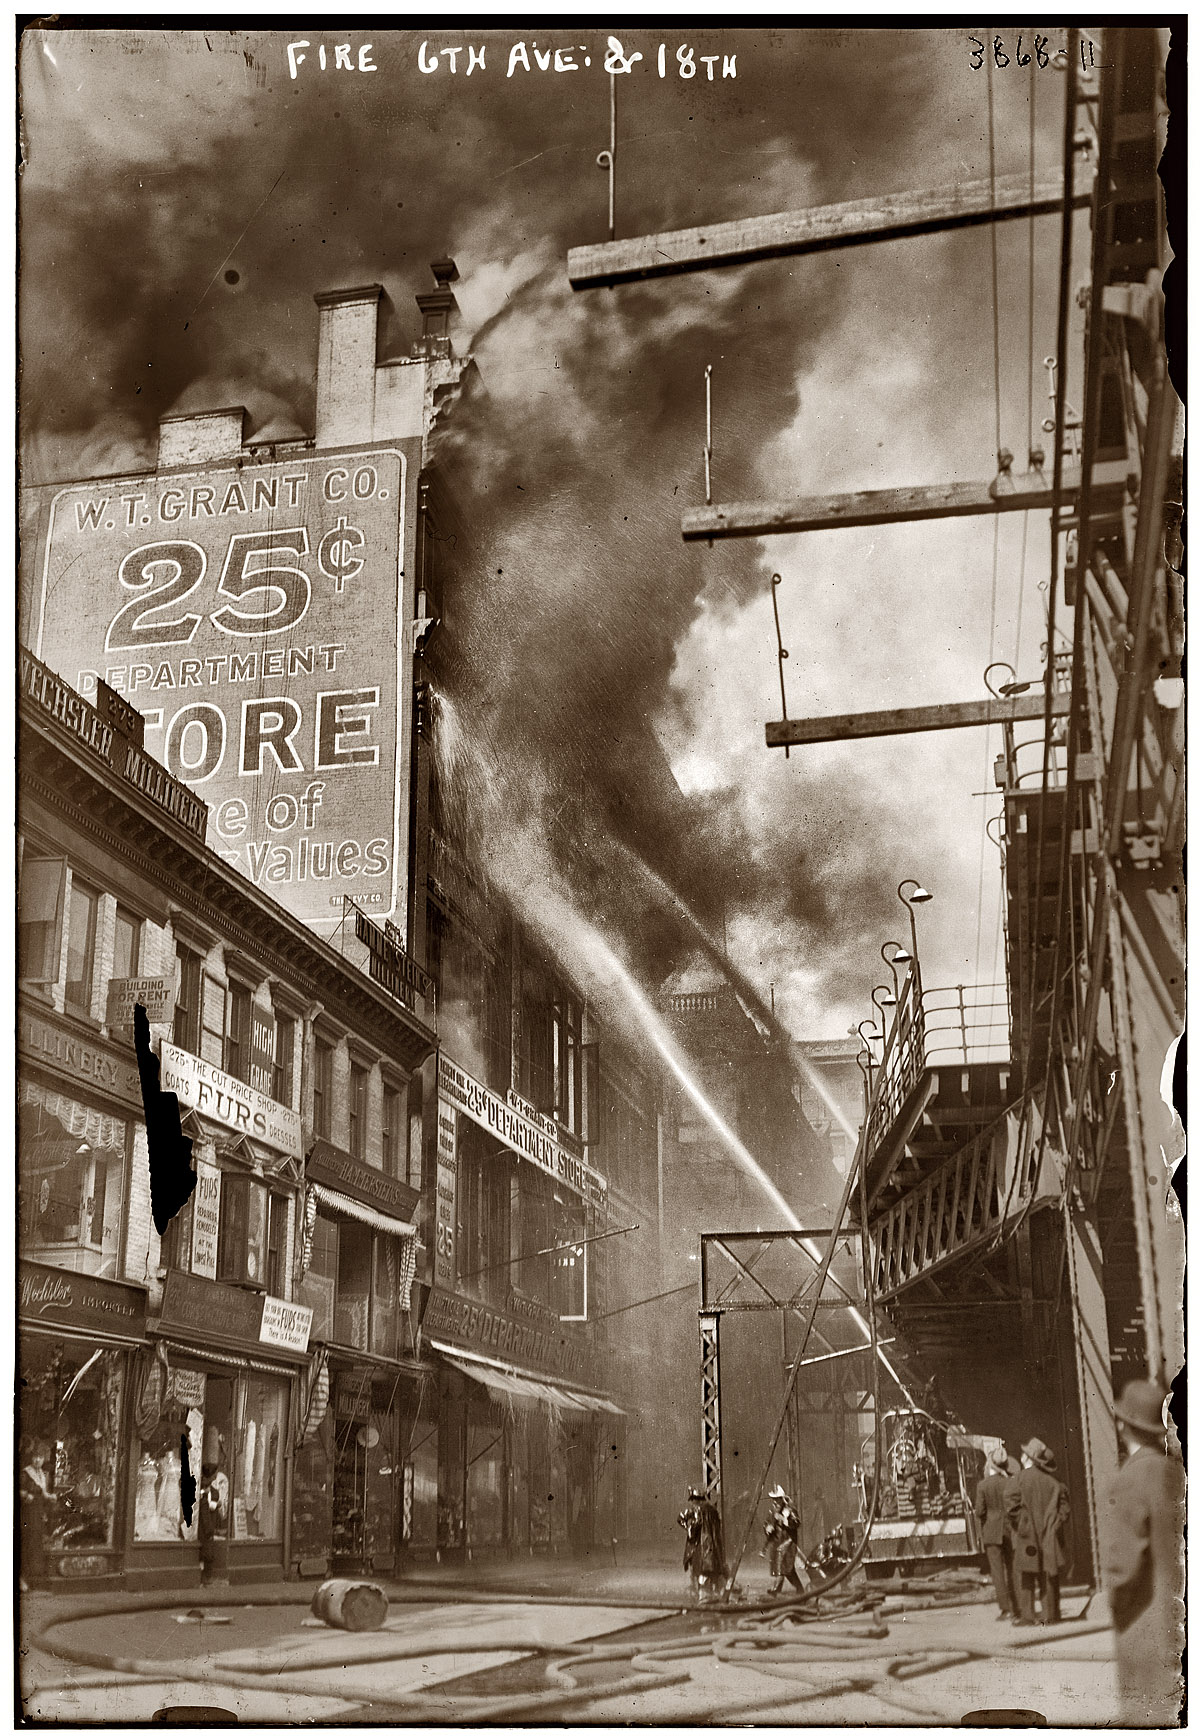 W.T. Grant department store fire at New York's Sixth Avenue and 18th Street in April 1916. View full size. George Grantham Bain Collection.